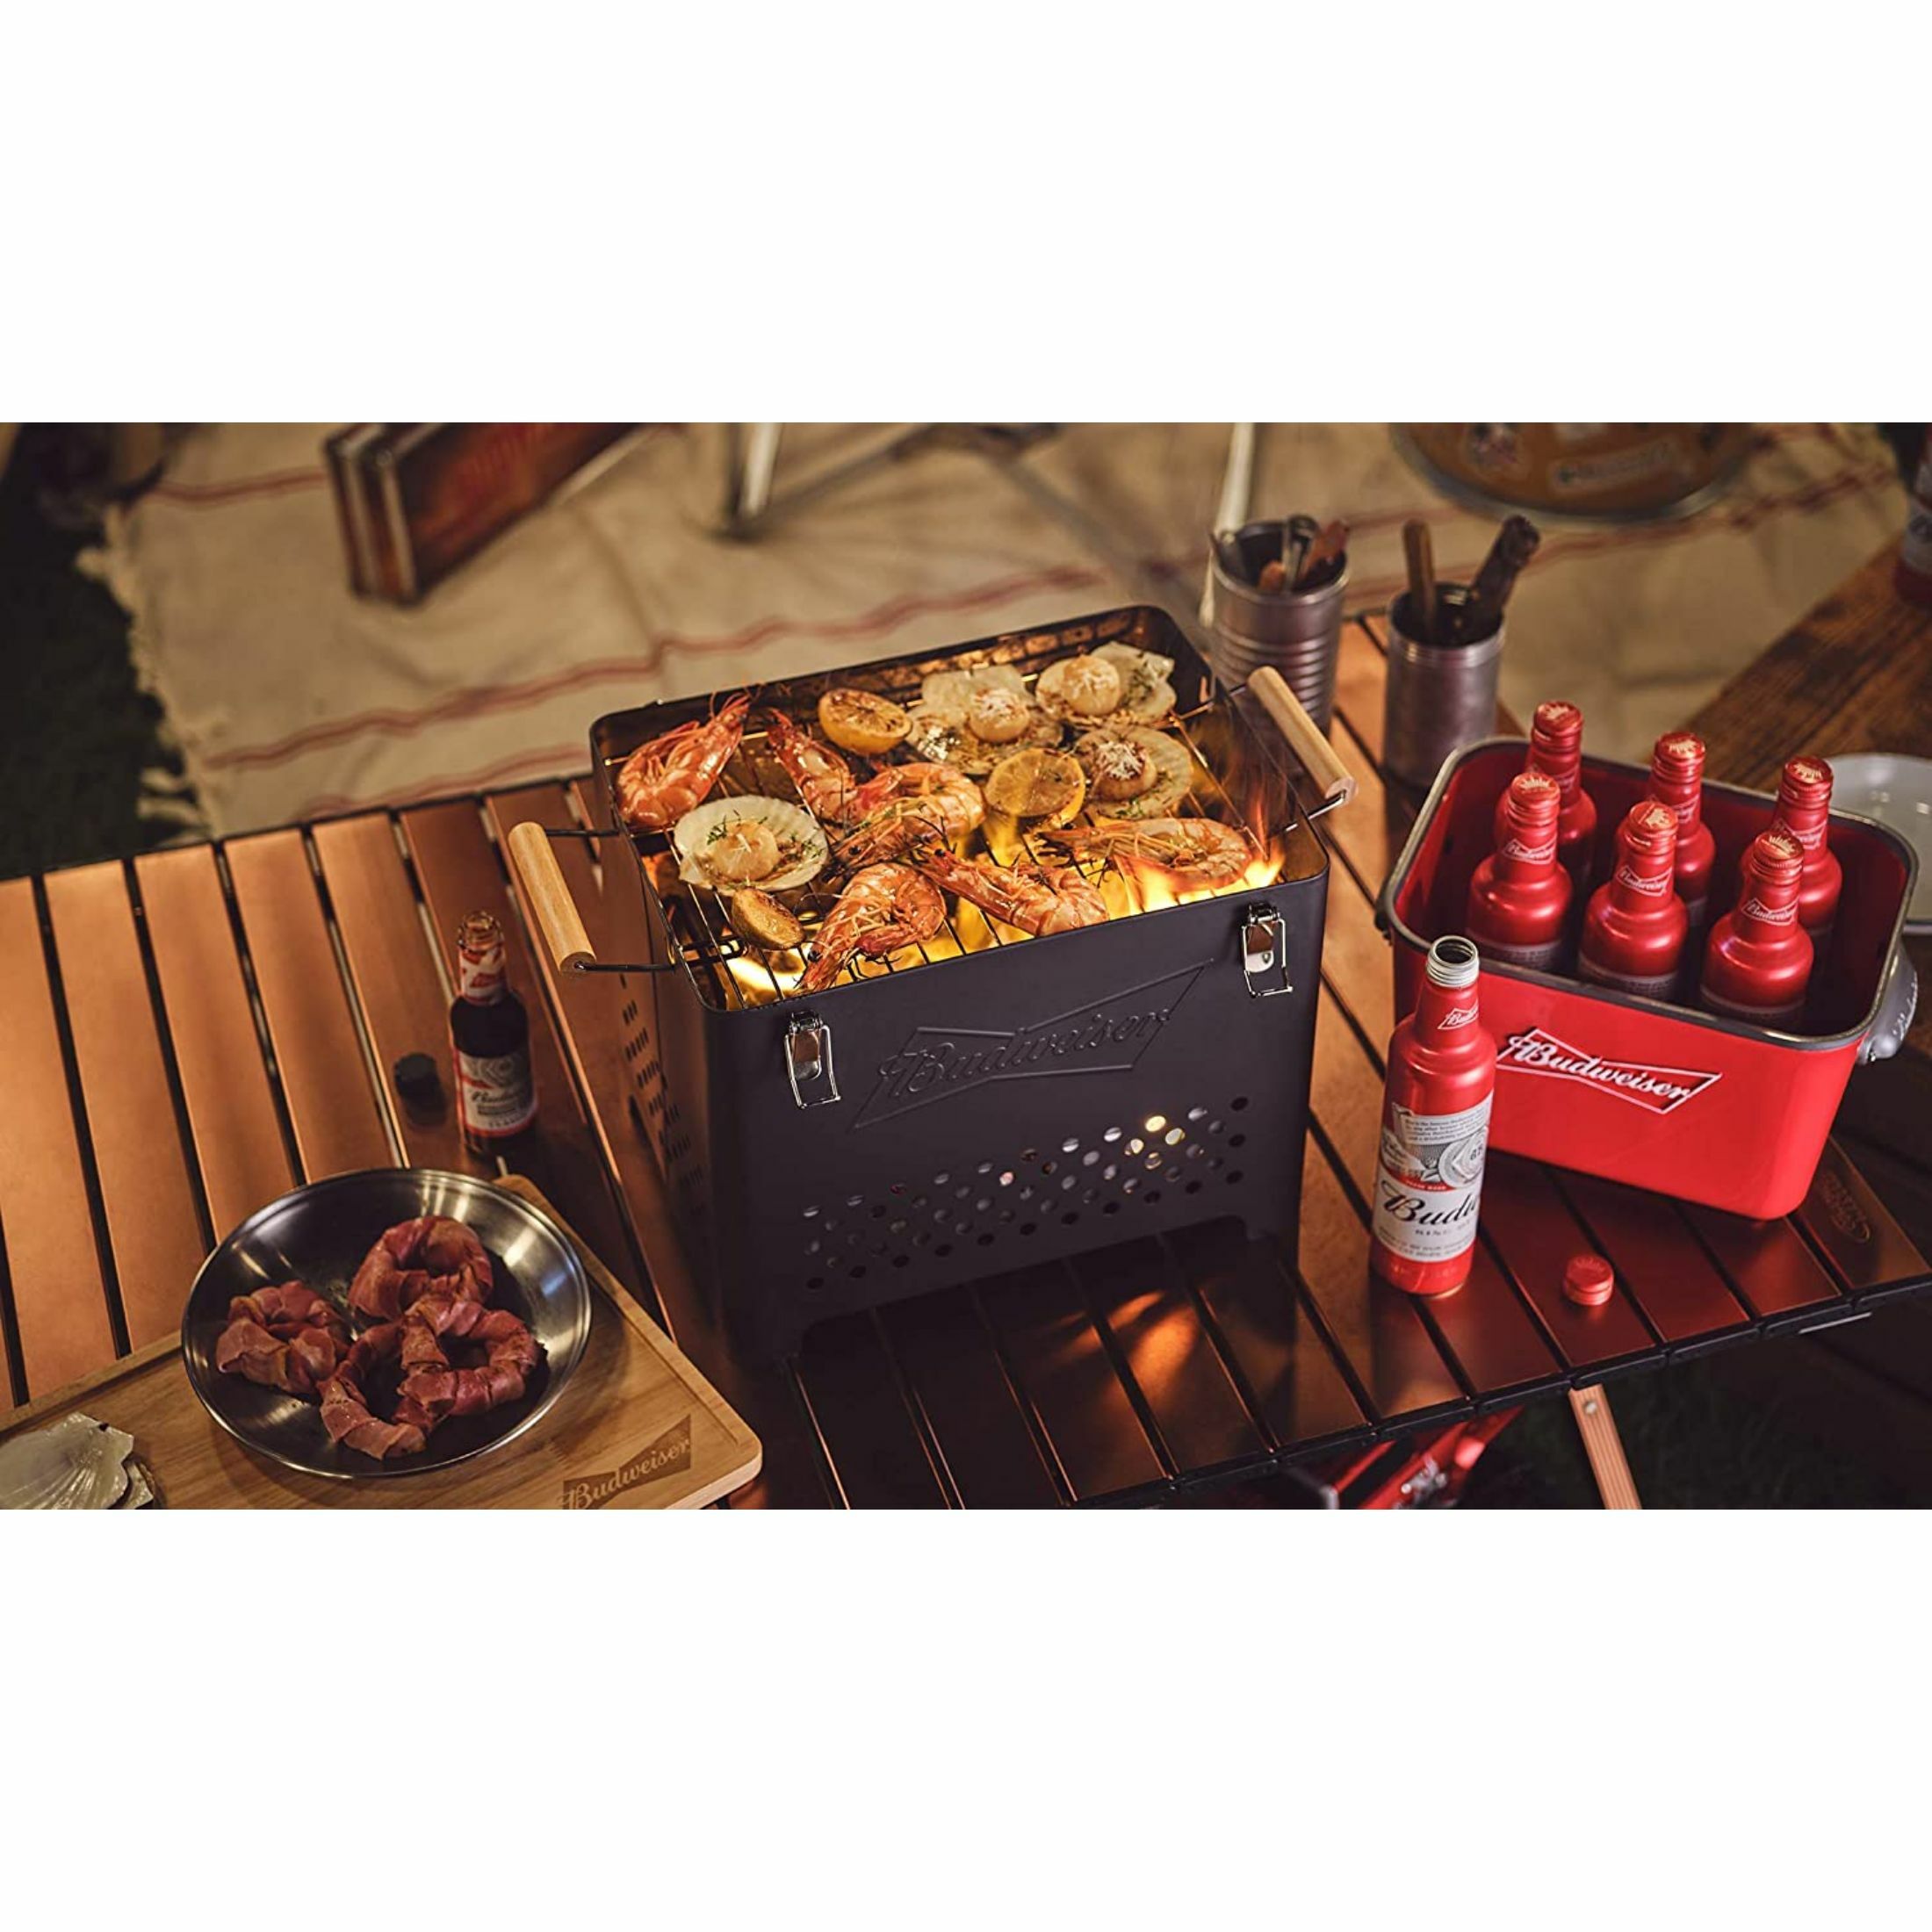 Budweiser Barbeque Charcoal Small Grill Set with Cutting Board - Black - image 2 of 3